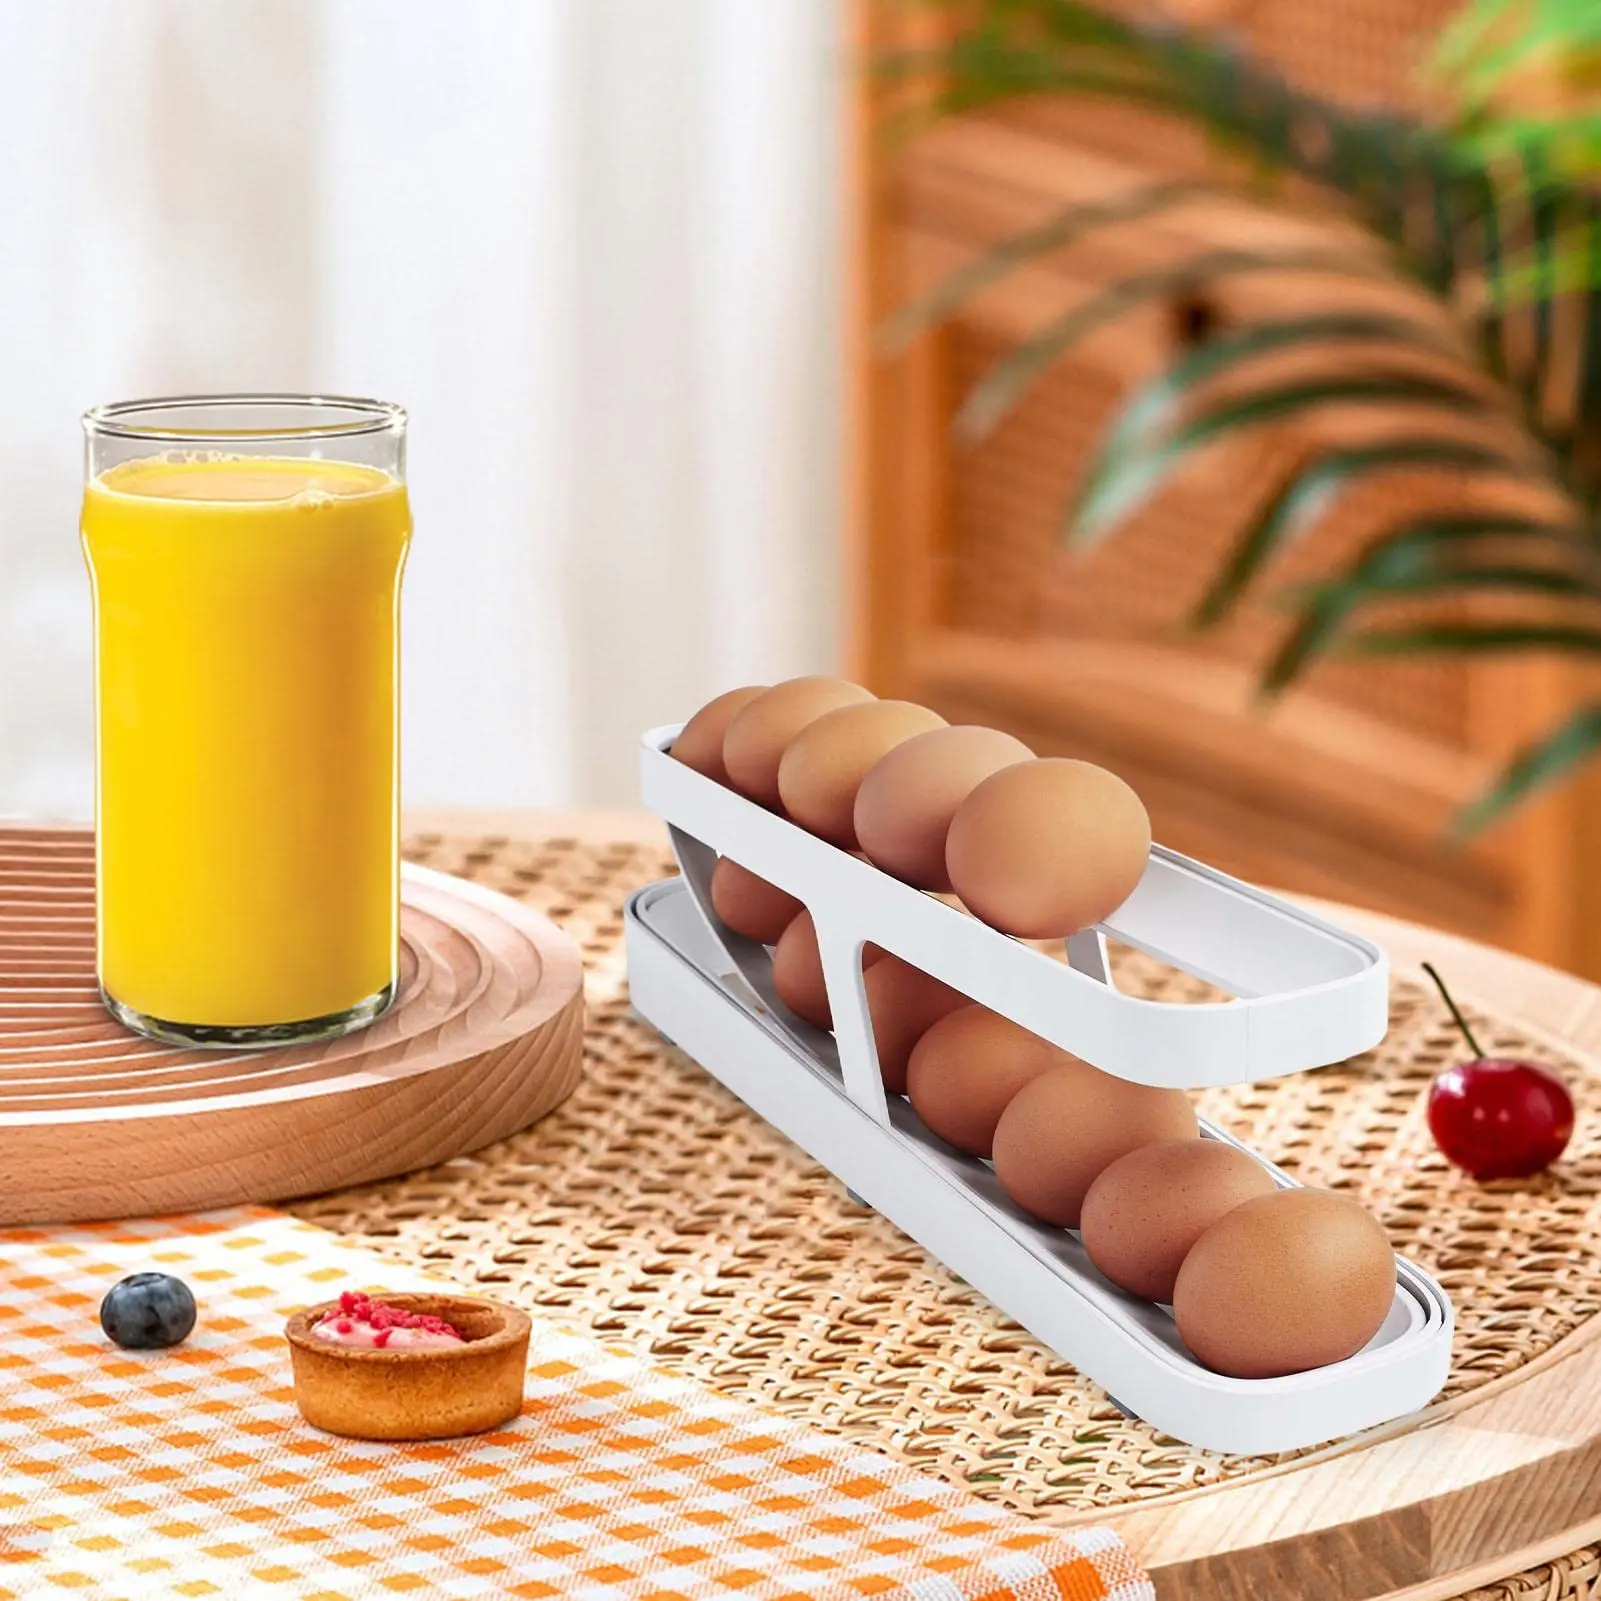 https://ae01.alicdn.com/kf/S5cf058e0c3054e6a8afe66295387ab16C/Egg-Holder-For-Refrigerator-Automatically-Rolling-Egg-Storage-Container-2-Tier-Rolling-Egg-Dispenser-Space-Saving.jpg